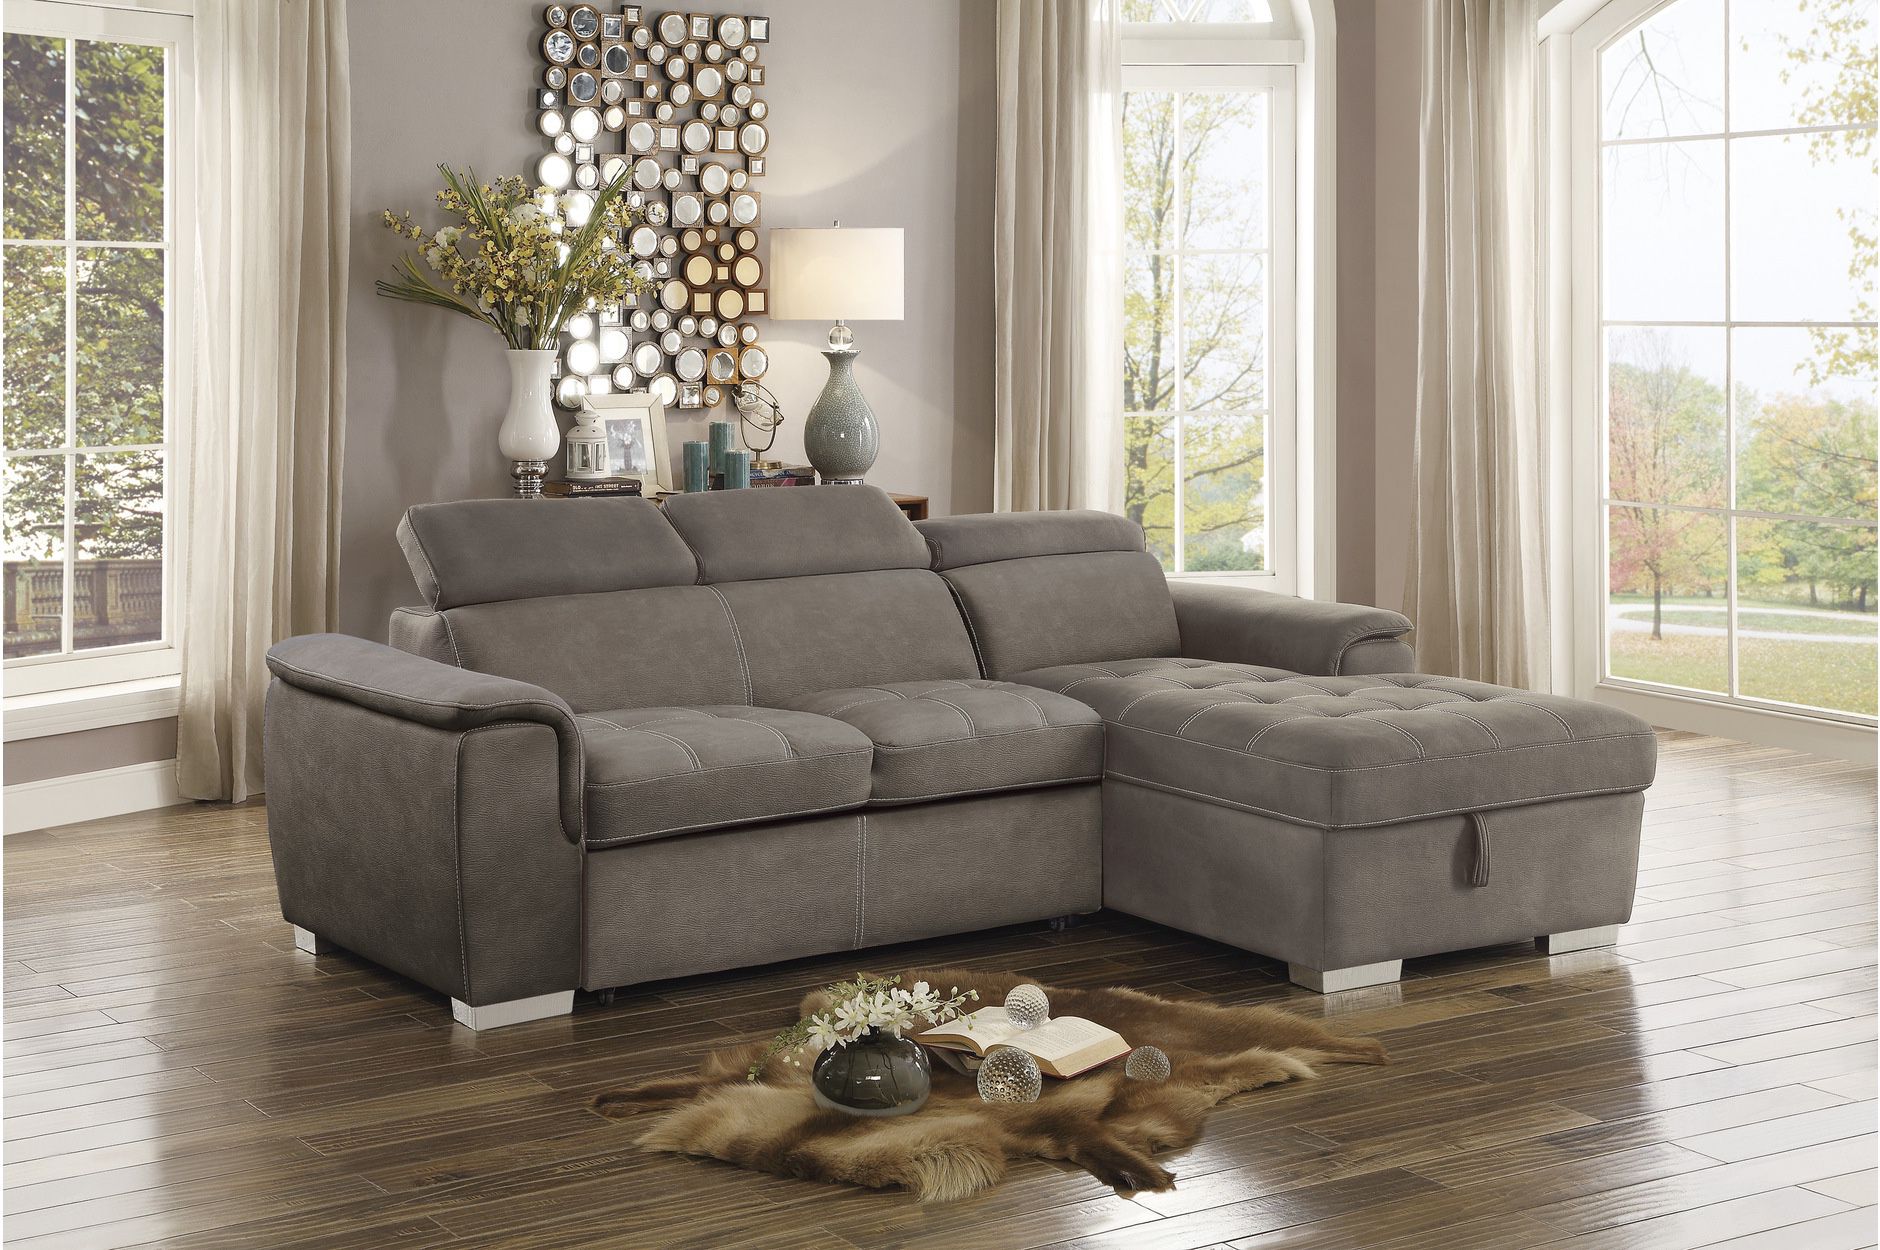 2 Piece Fabric Sectional With Storage And Sleeper 